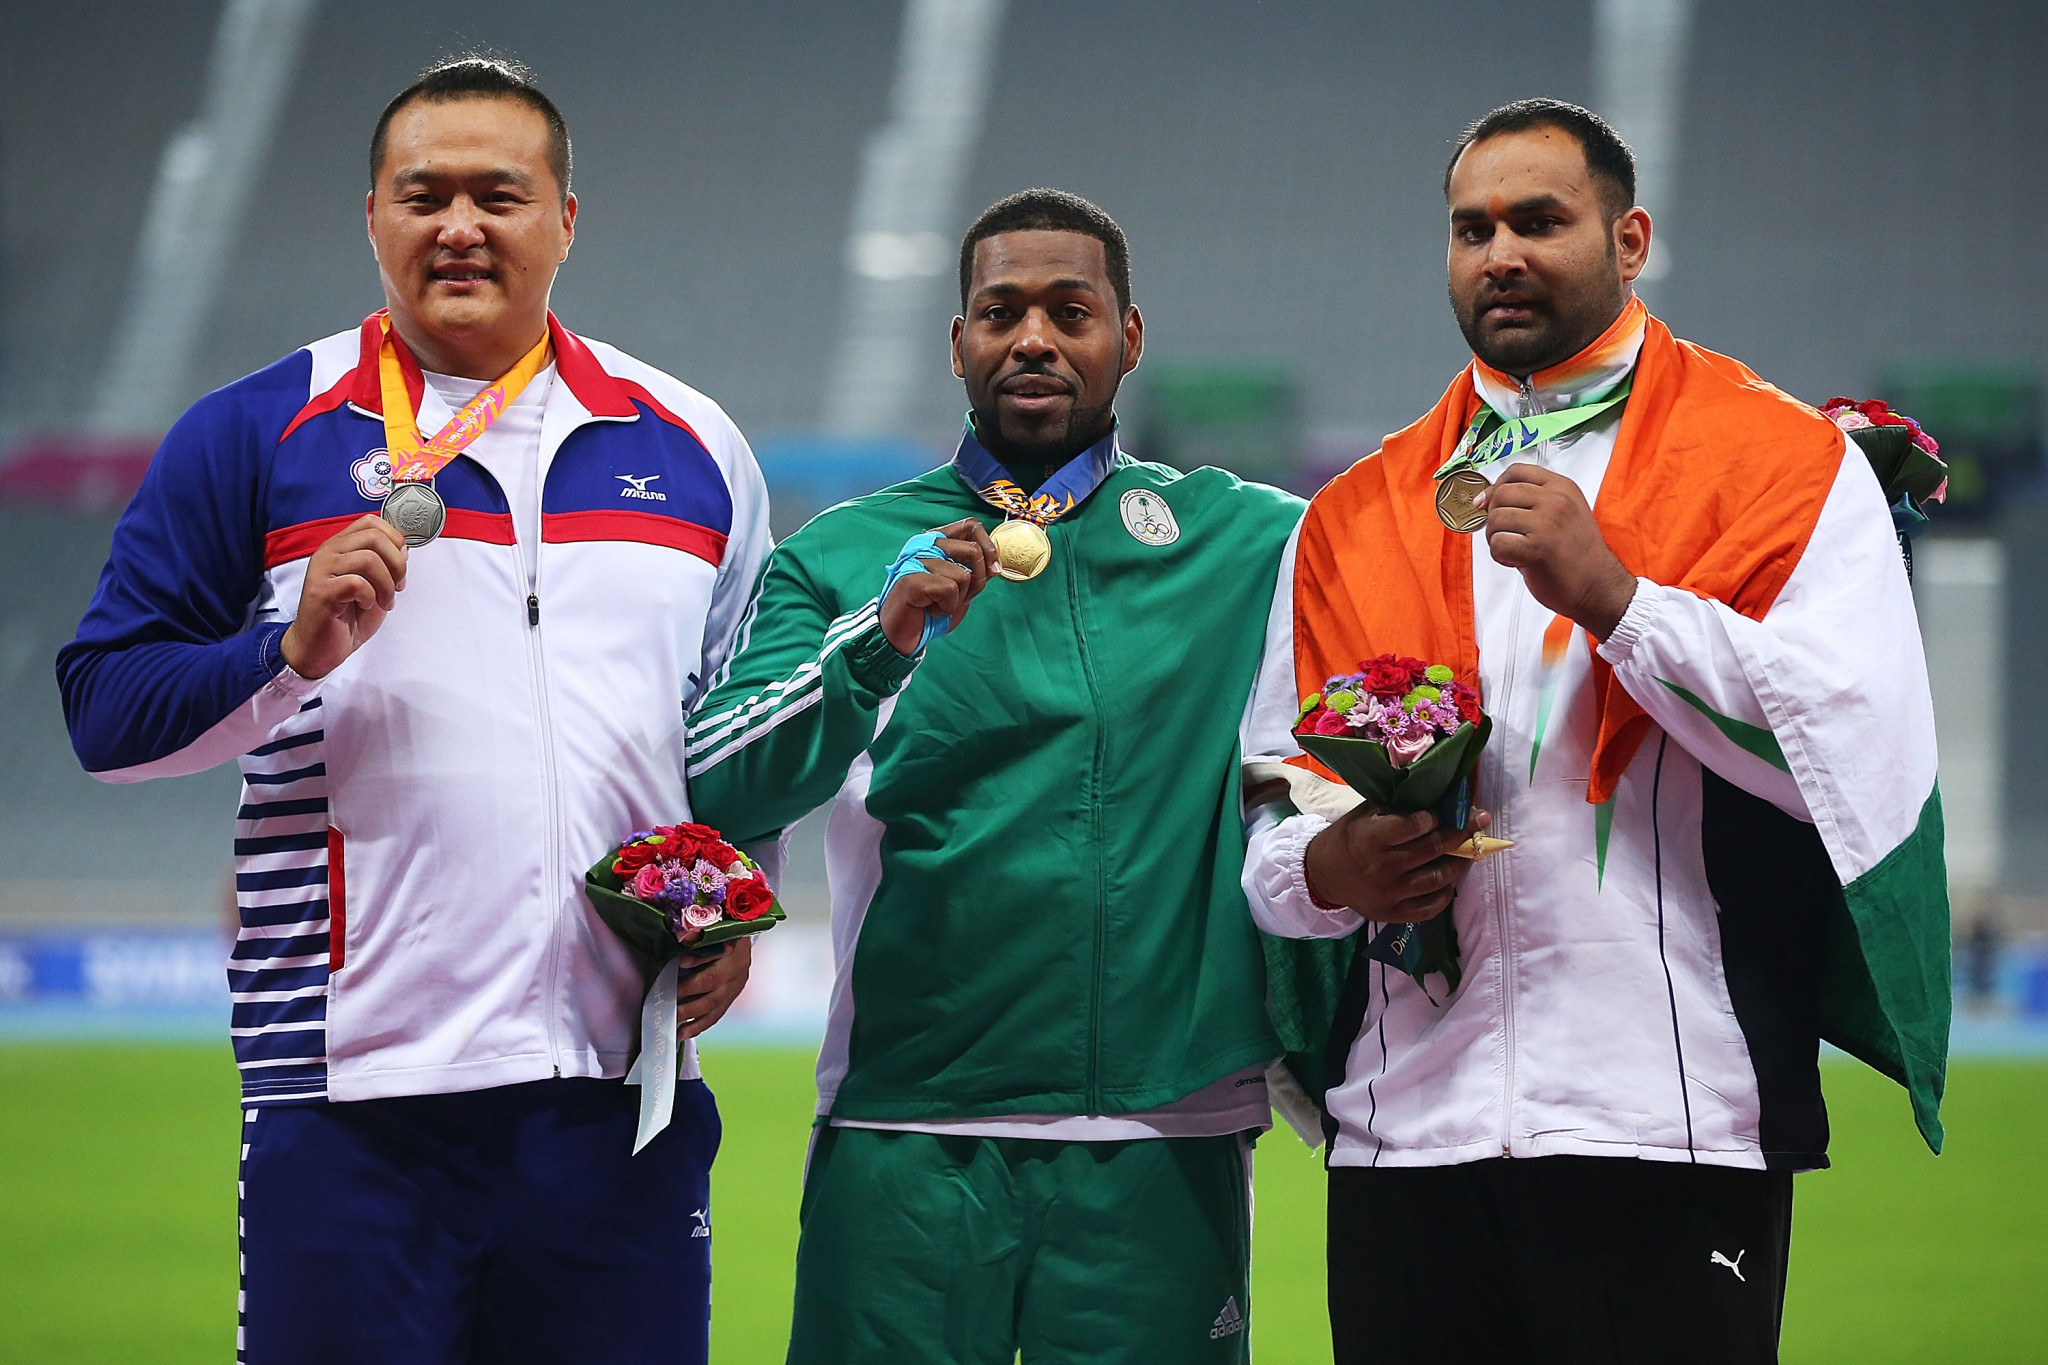 Inderjeet Singh, right, won Asian Games bronze in Incheon in 2014 ©Getty Images